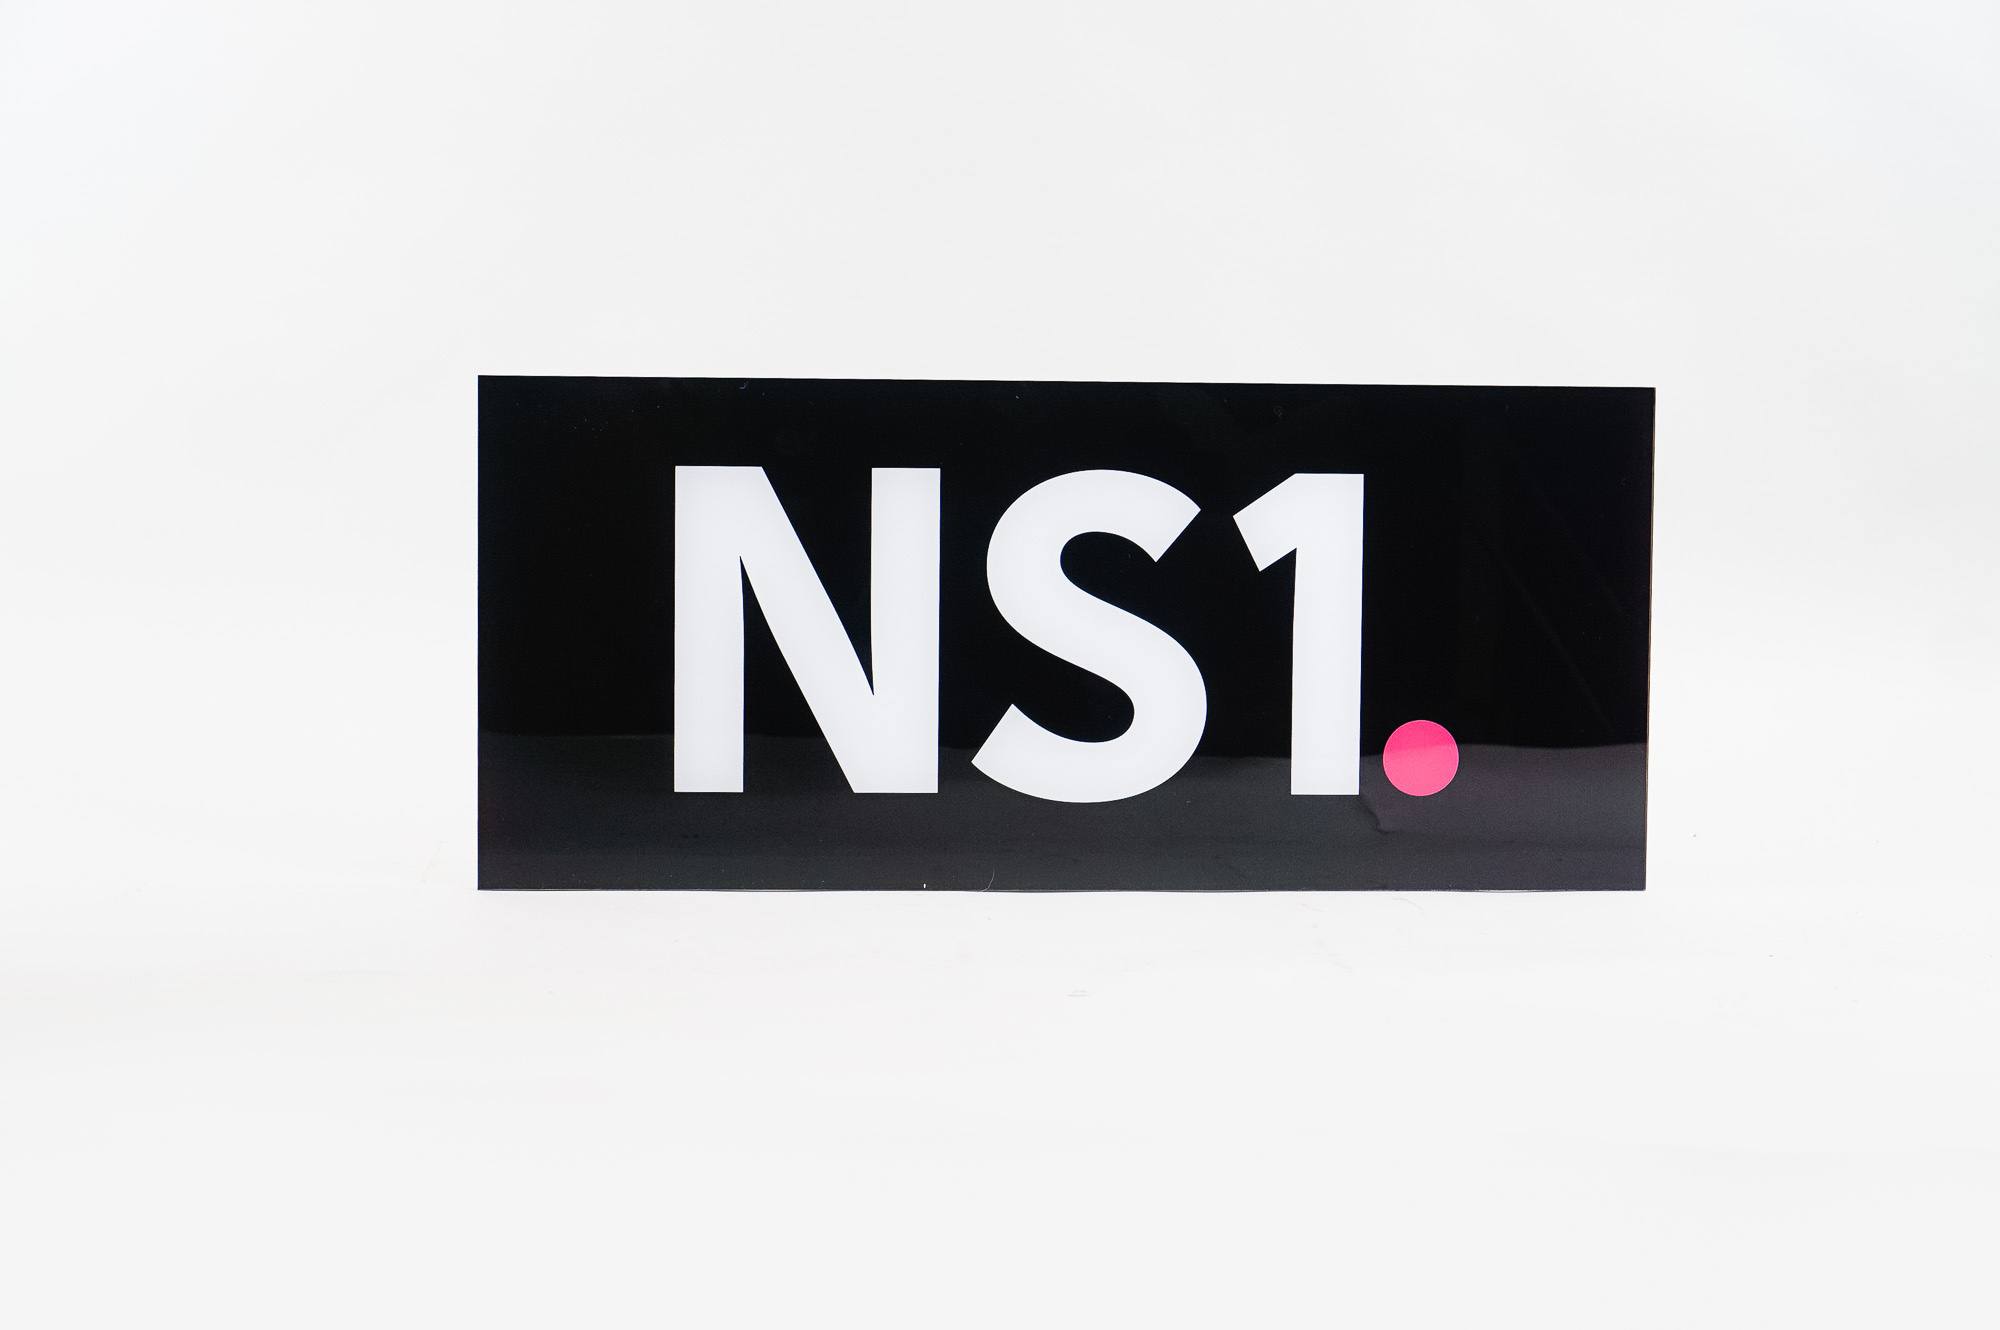 Glossy black, back-painted sign for NS1, a San Francisco based company that manages DNS and traffic technologies.